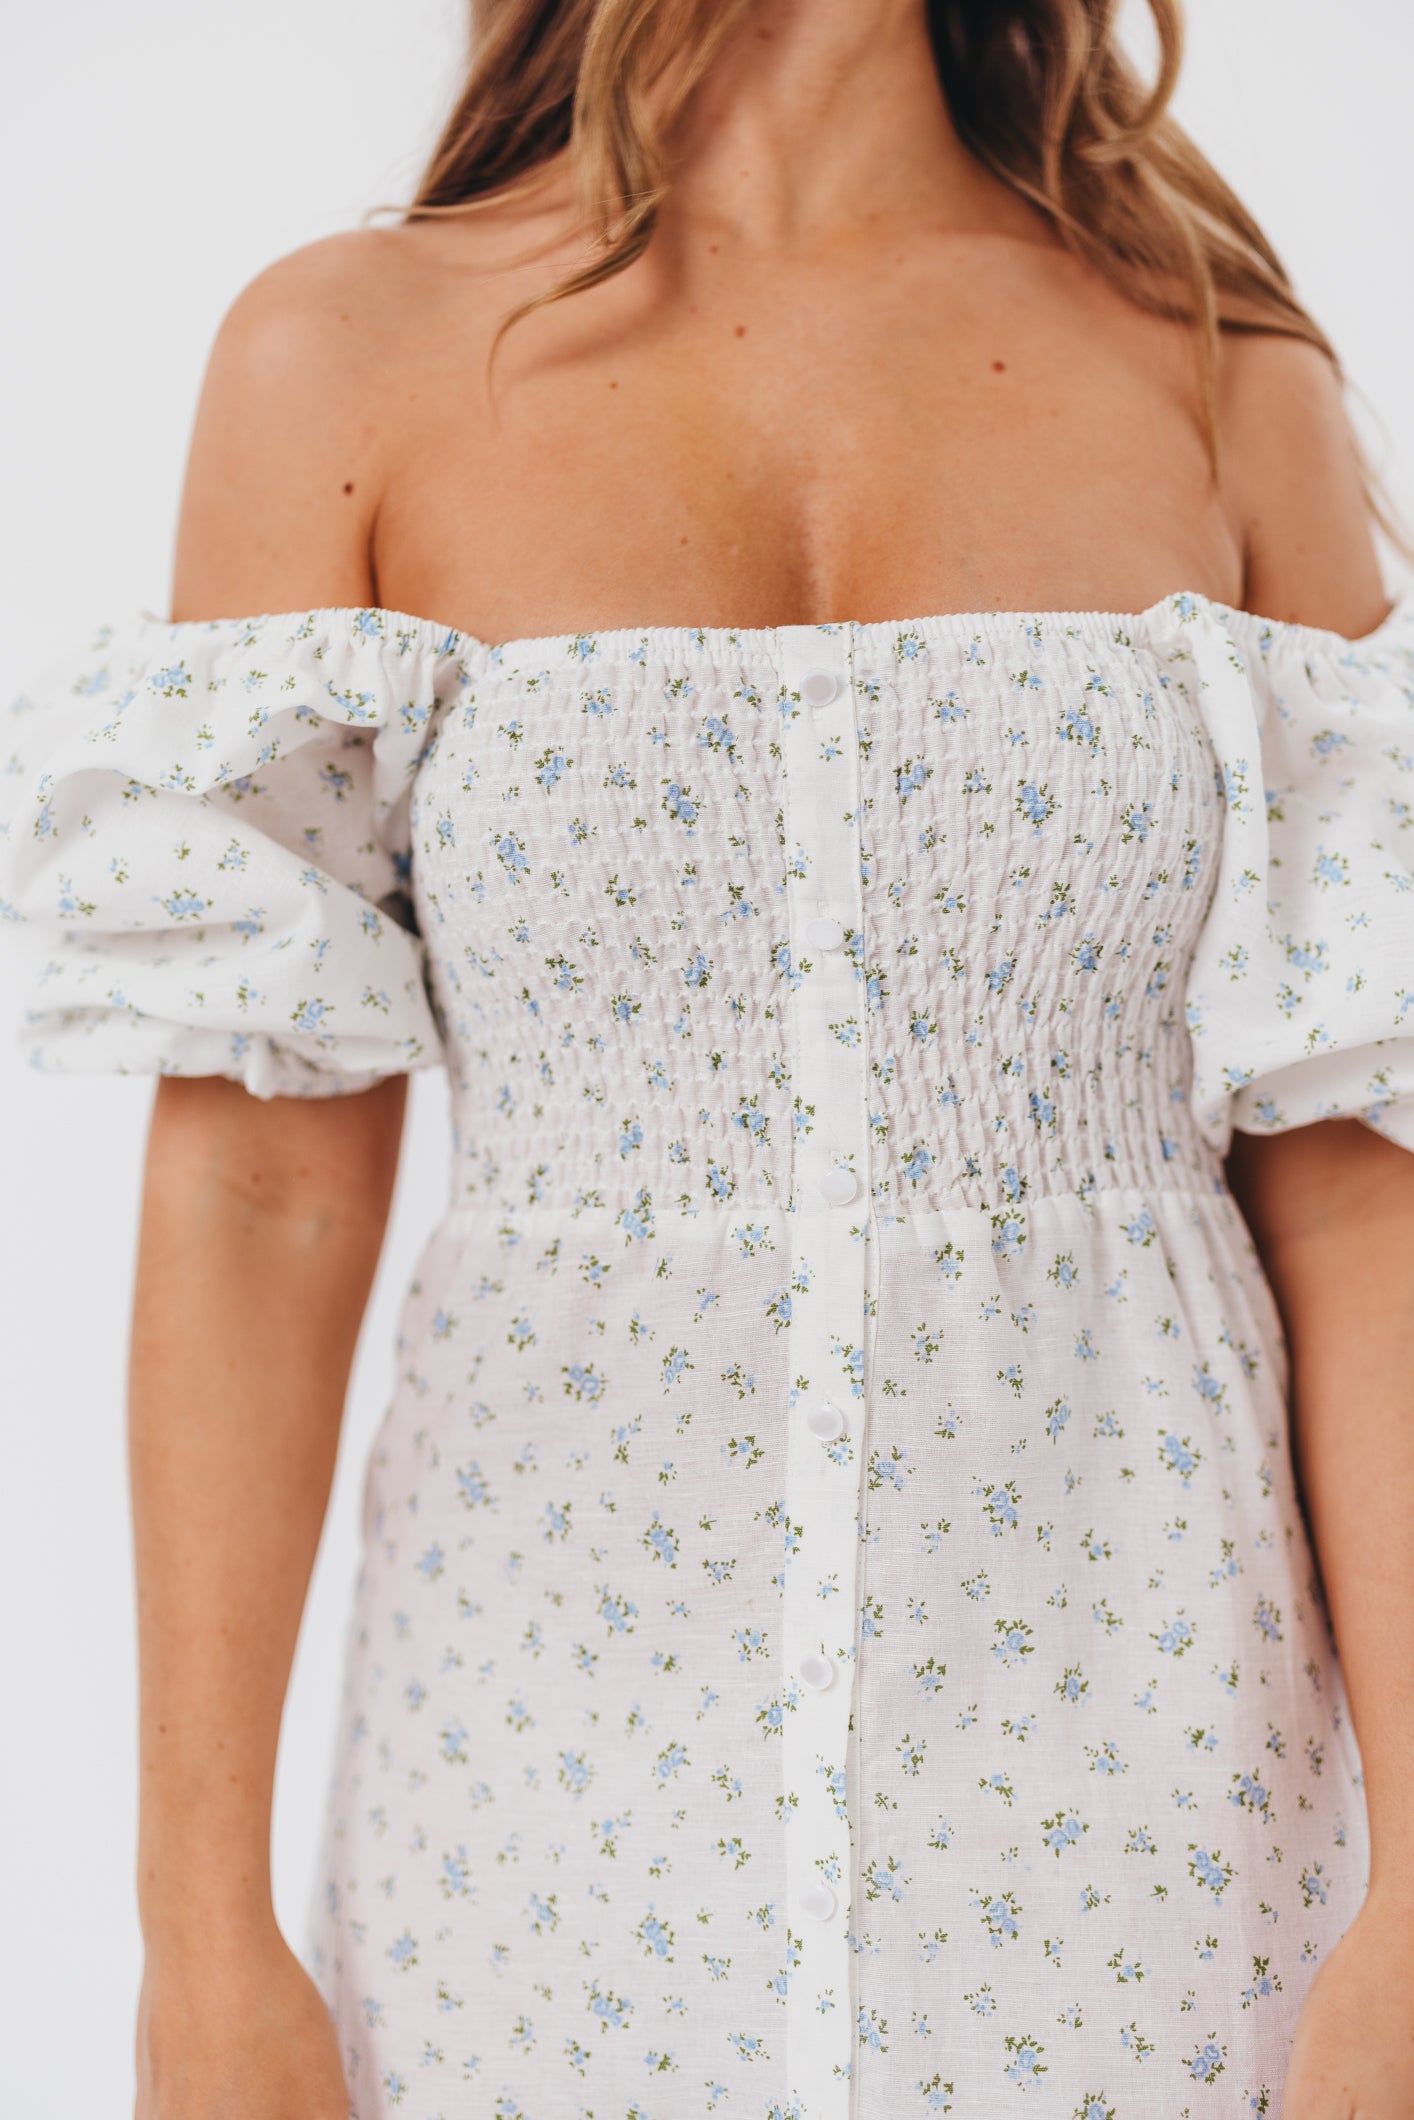 Daisy Maxi Dress in White/Blue Floral